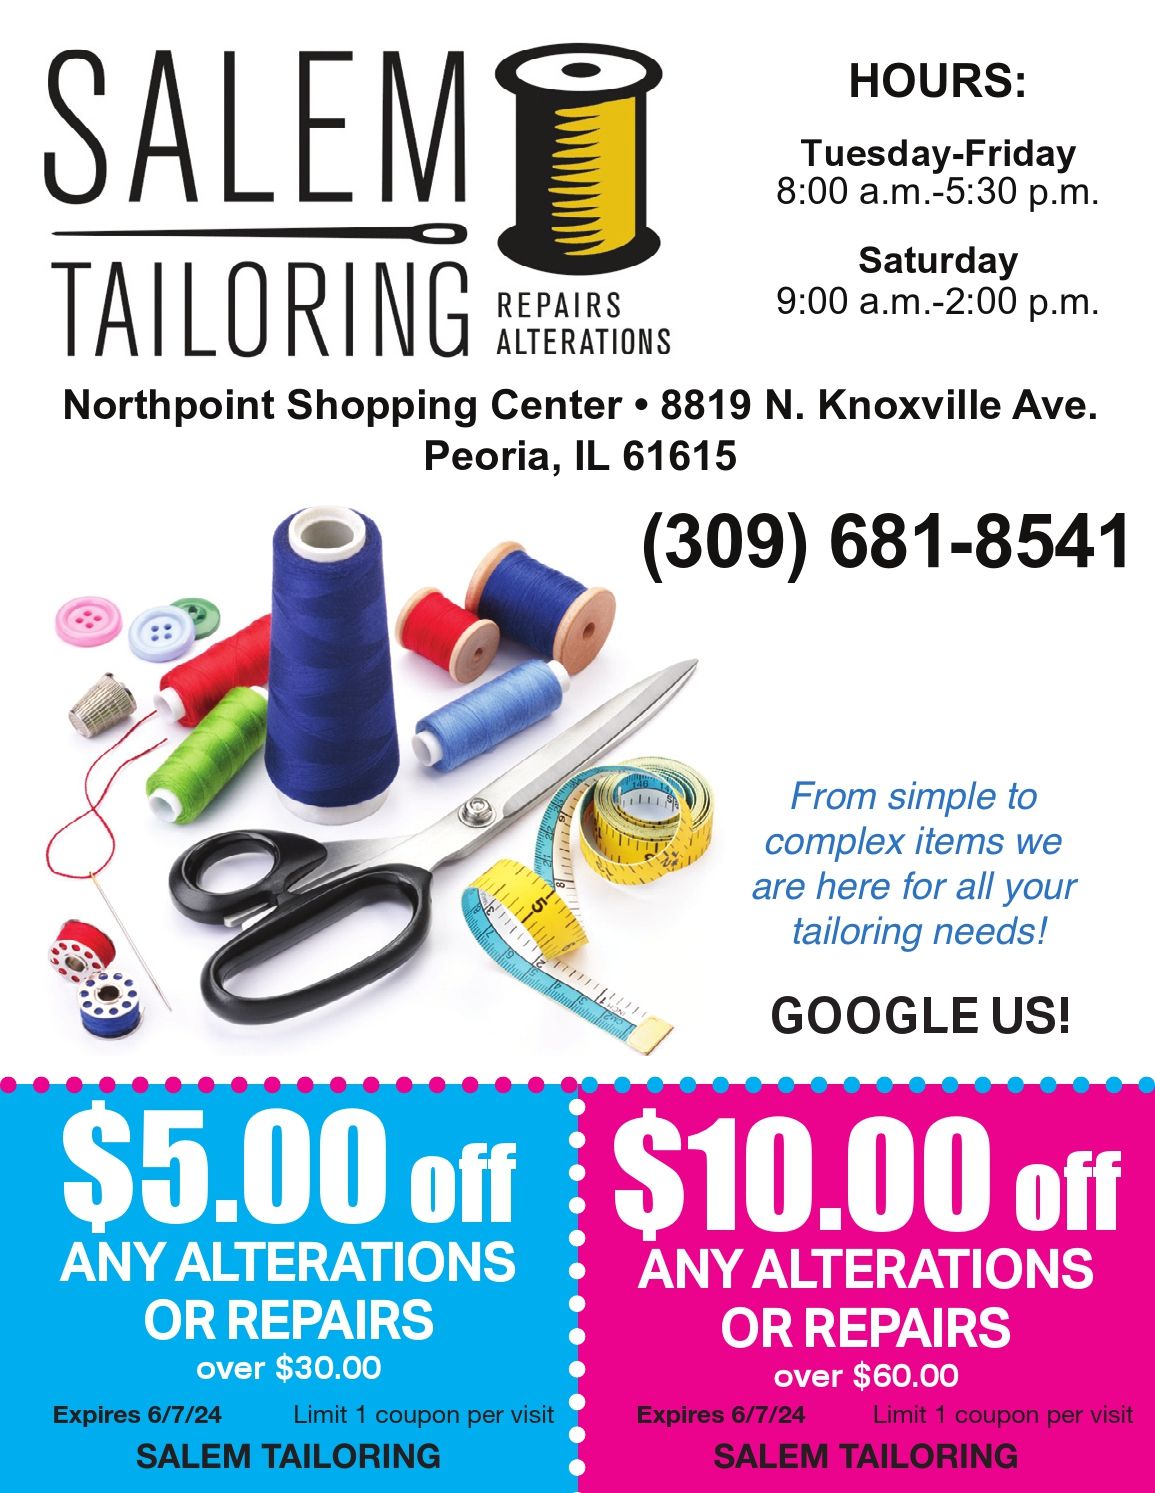 Salem Tailoring, repairs and alterations, formal coupons, jeans, dresses, pants, shirts, hems, all clothing coupons $5 off $30 and $10 off $60, Northpoint Shopping Center, Peoria, IL